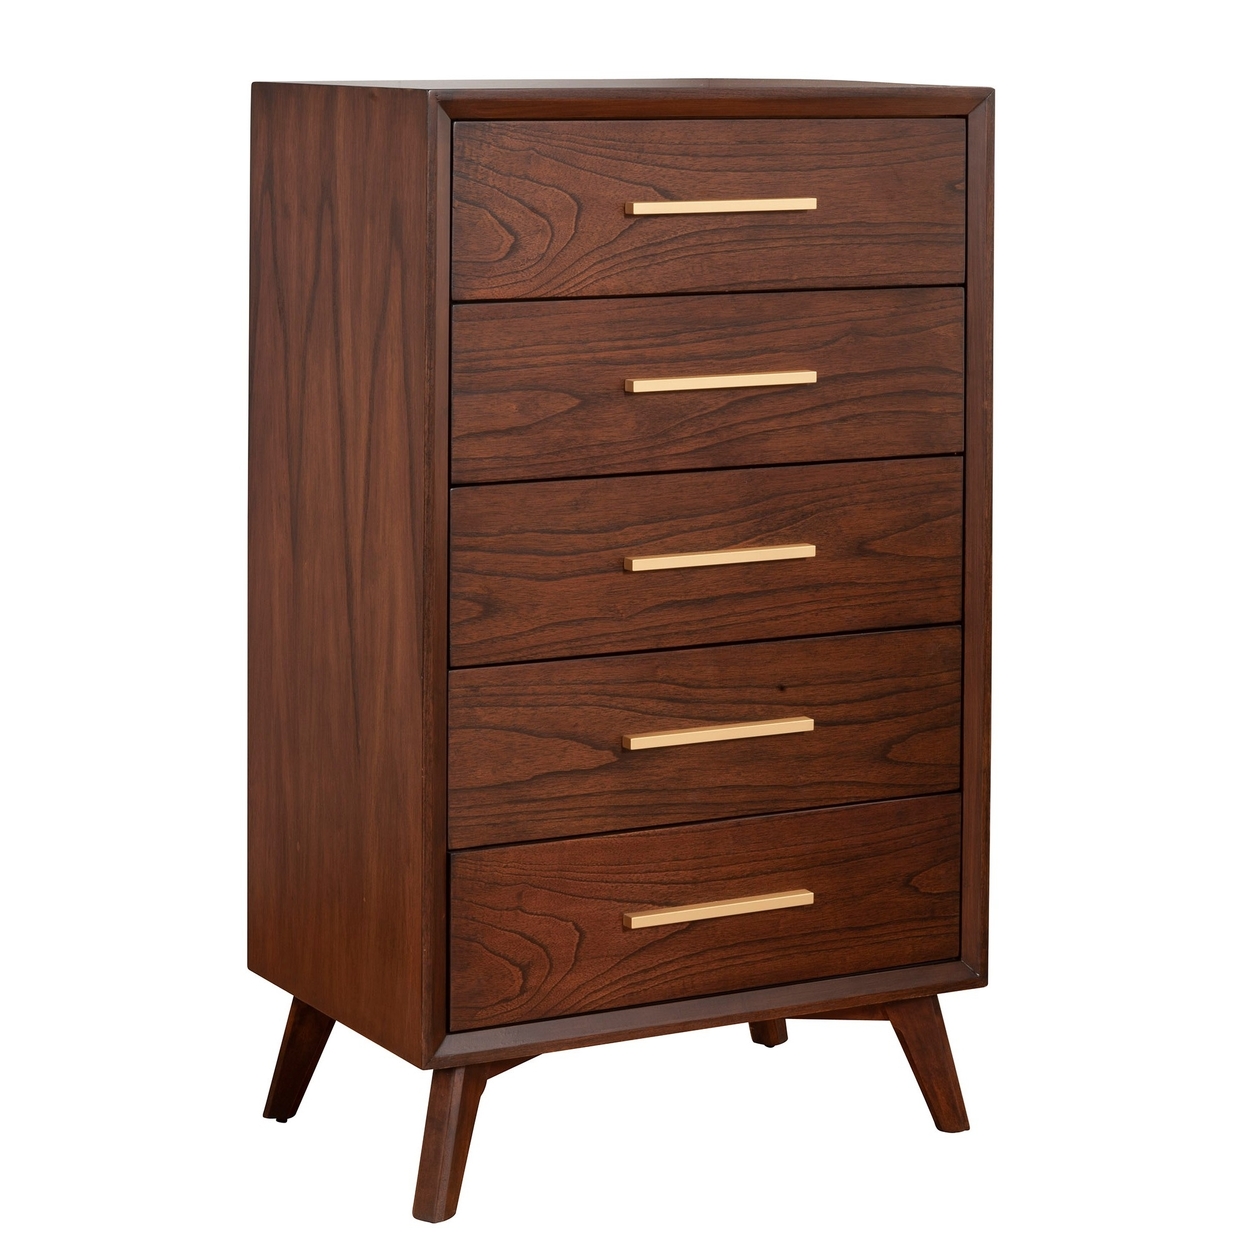 47 Inch Wooden Chest With 5 Drawers, Brown- Saltoro Sherpi